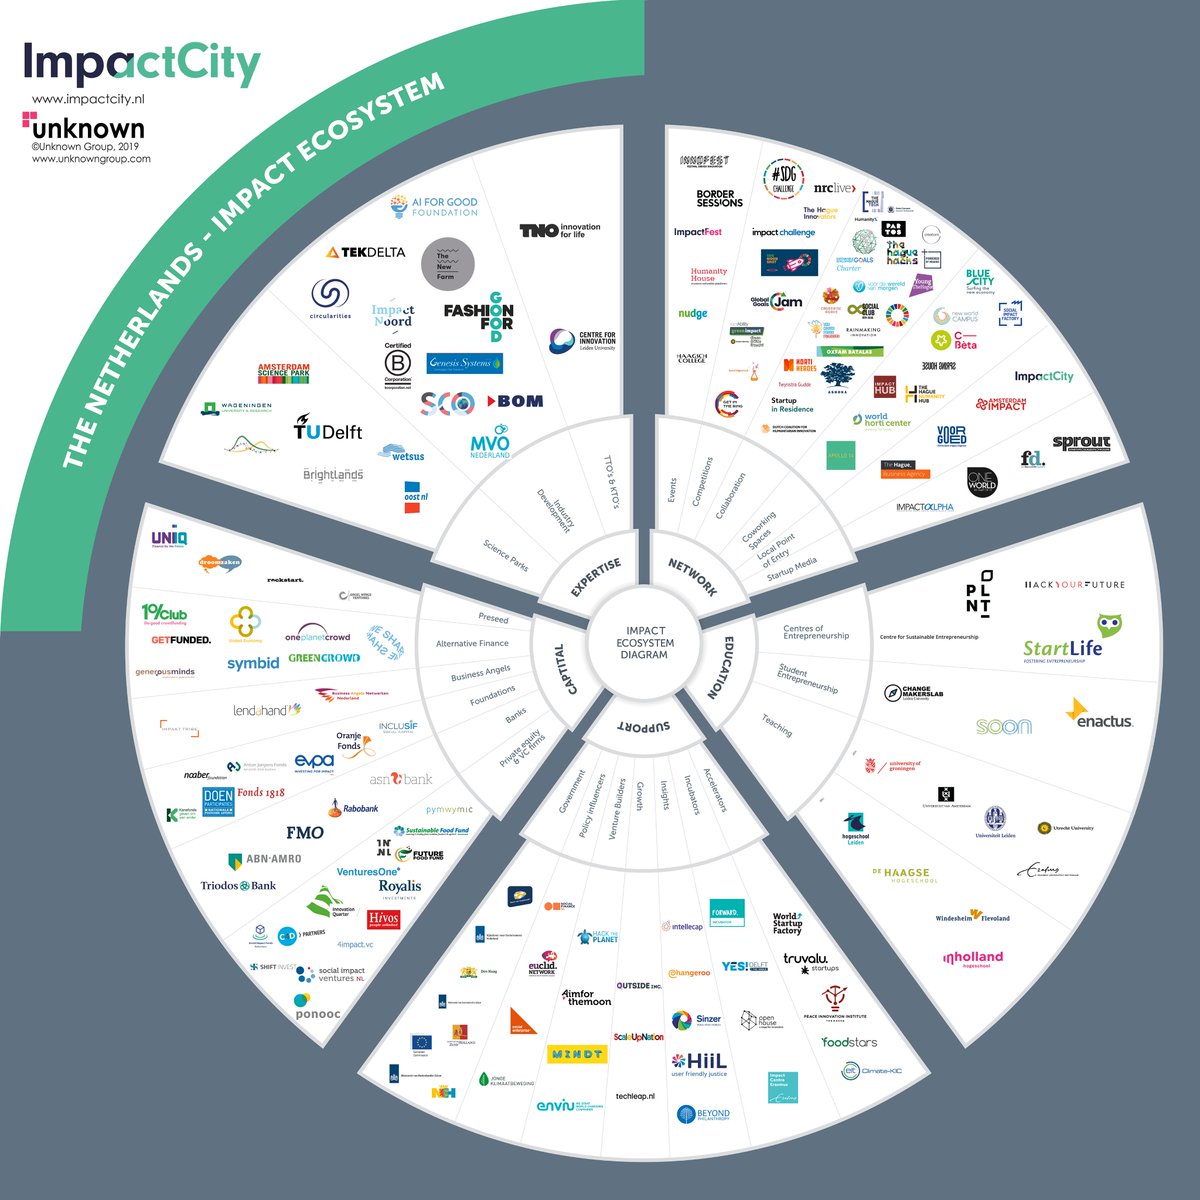 Are you looking for funding? Check out the #NLimpactdiagram to see who you can talk to:
tinyurl.com/vzh2ejp

@Invest_NL @FMO_development @Rabobank @StichtingDOEN @InnoQuarter @WeShareImpact @generousminds and many more!

#impactfunding #socfin #impinv #socent #funding #socinv